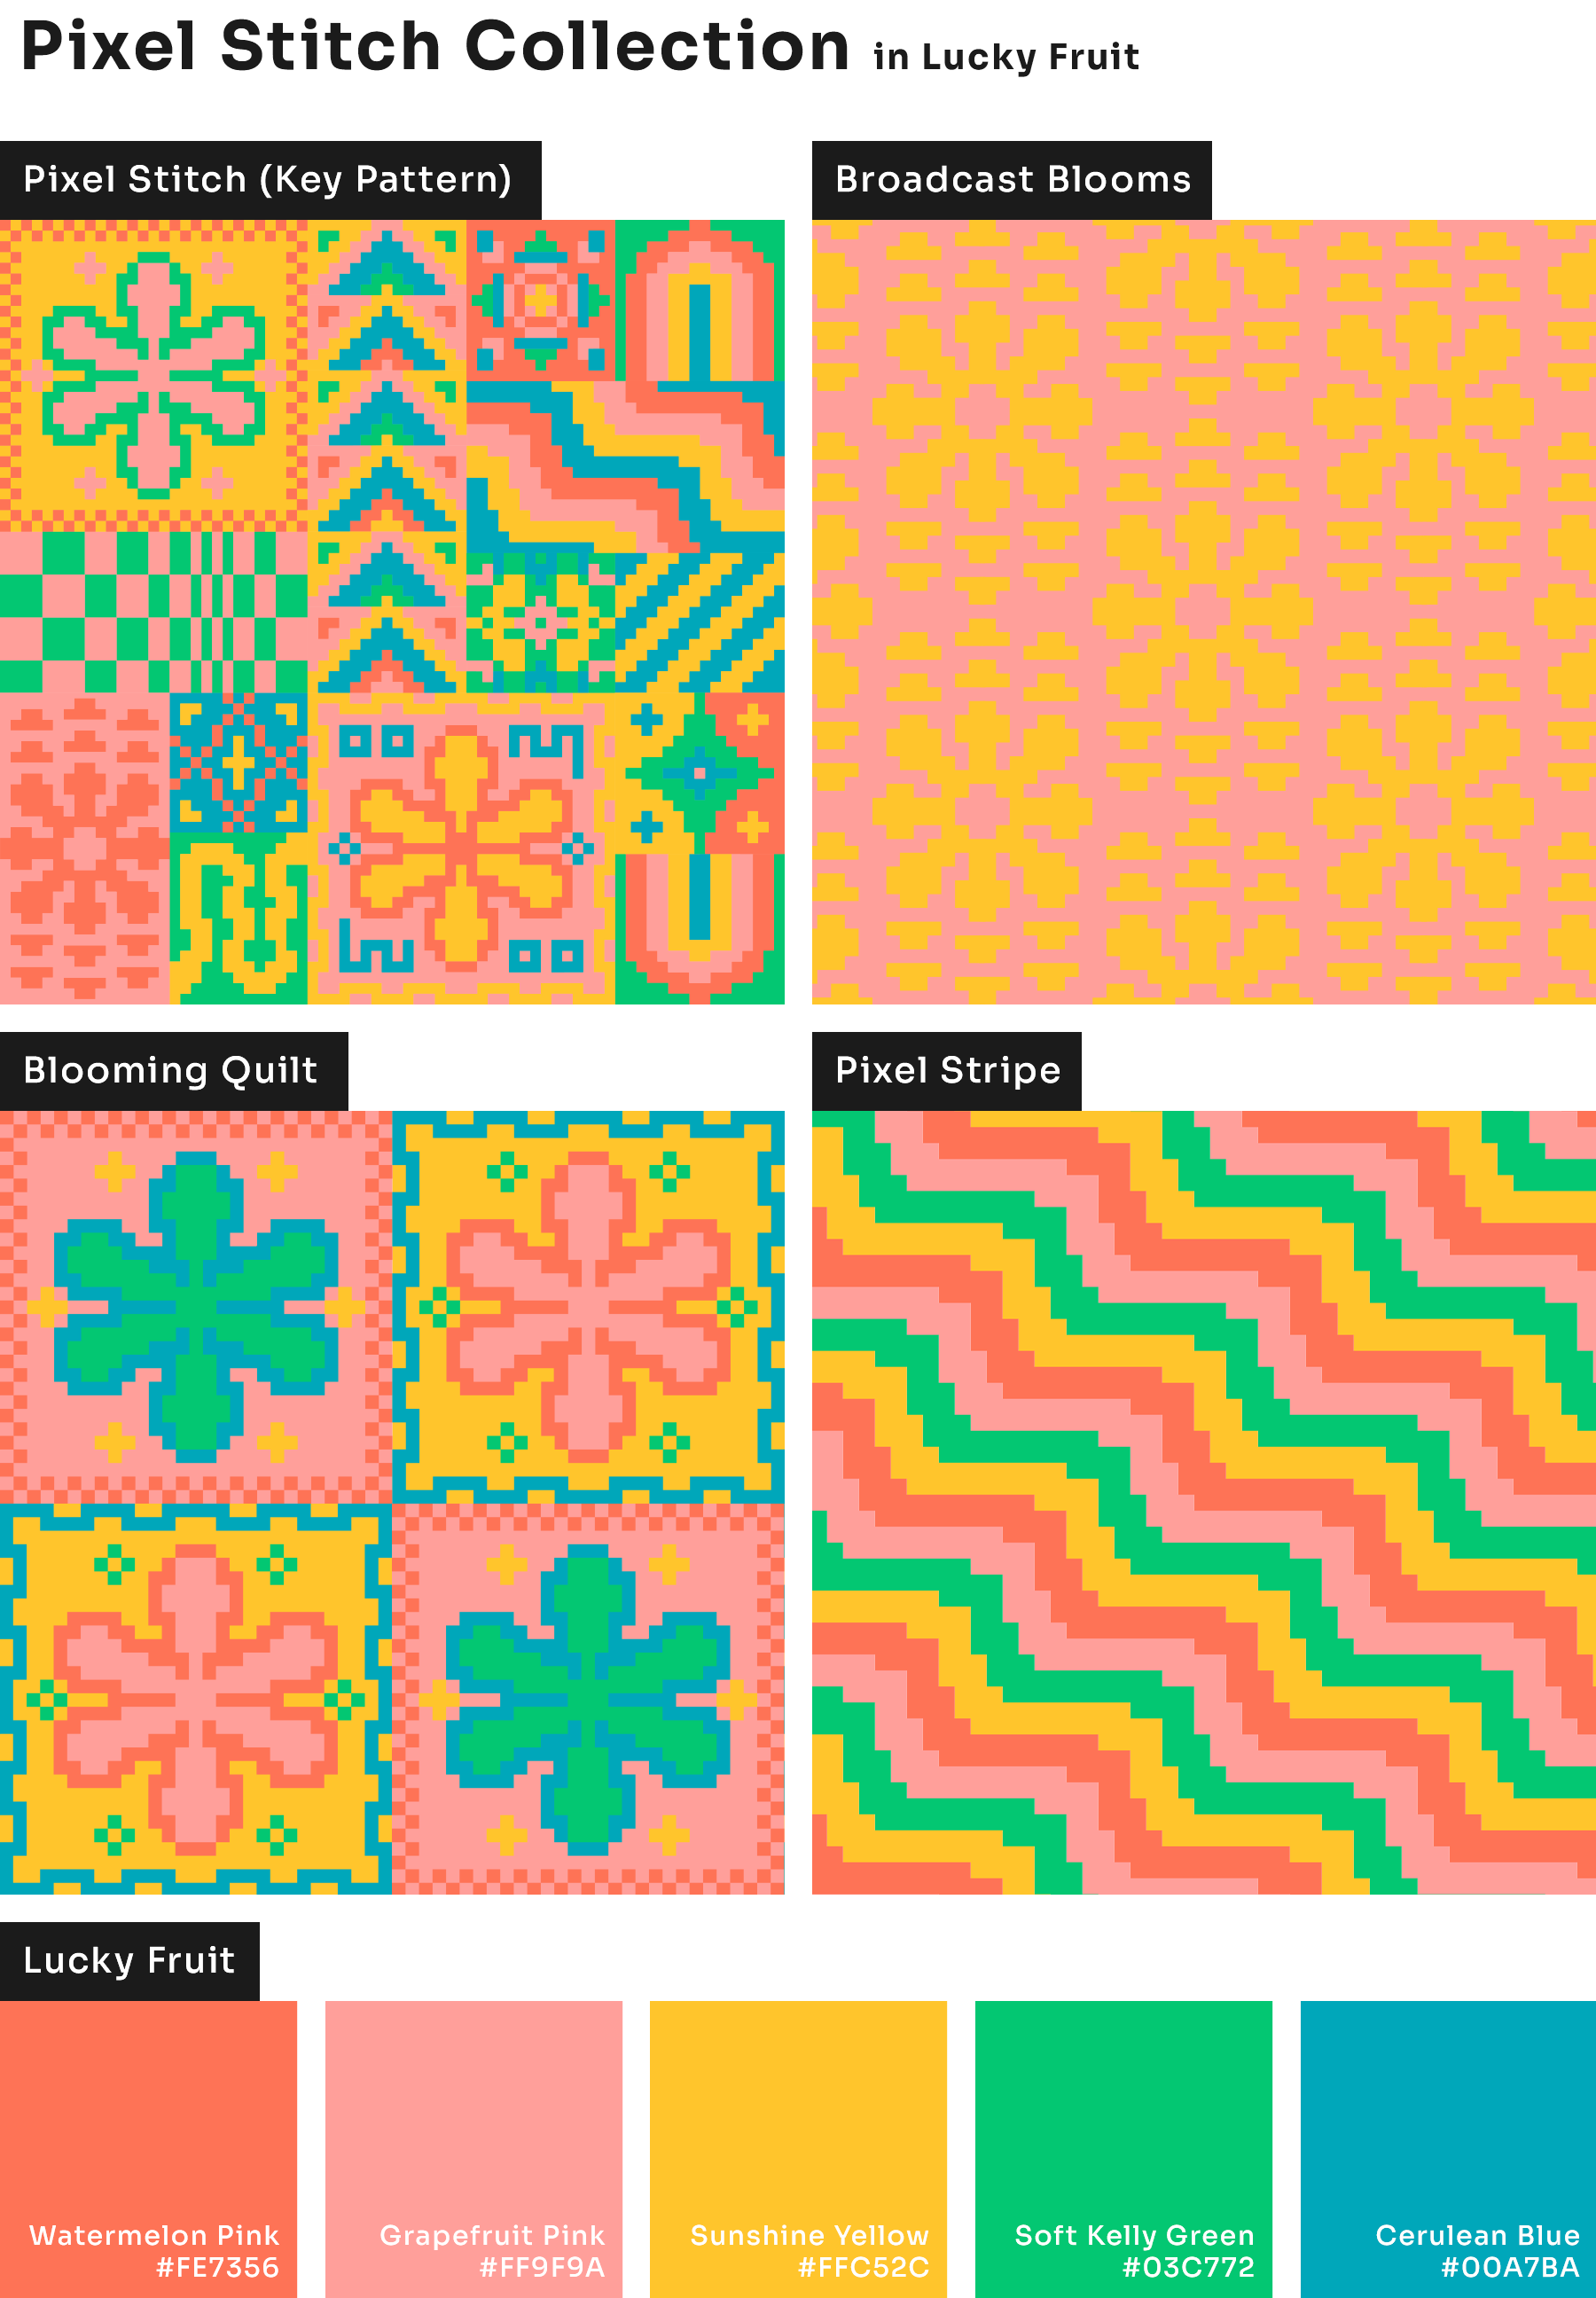 Pixel Stitch pattern collection in Lucky Fruit- neon pastels in Watermelon pink, grapefruit pink, sunshine yellow, soft kelly green, and cerulean blue. Patterns are stacked with color palette on bottom.